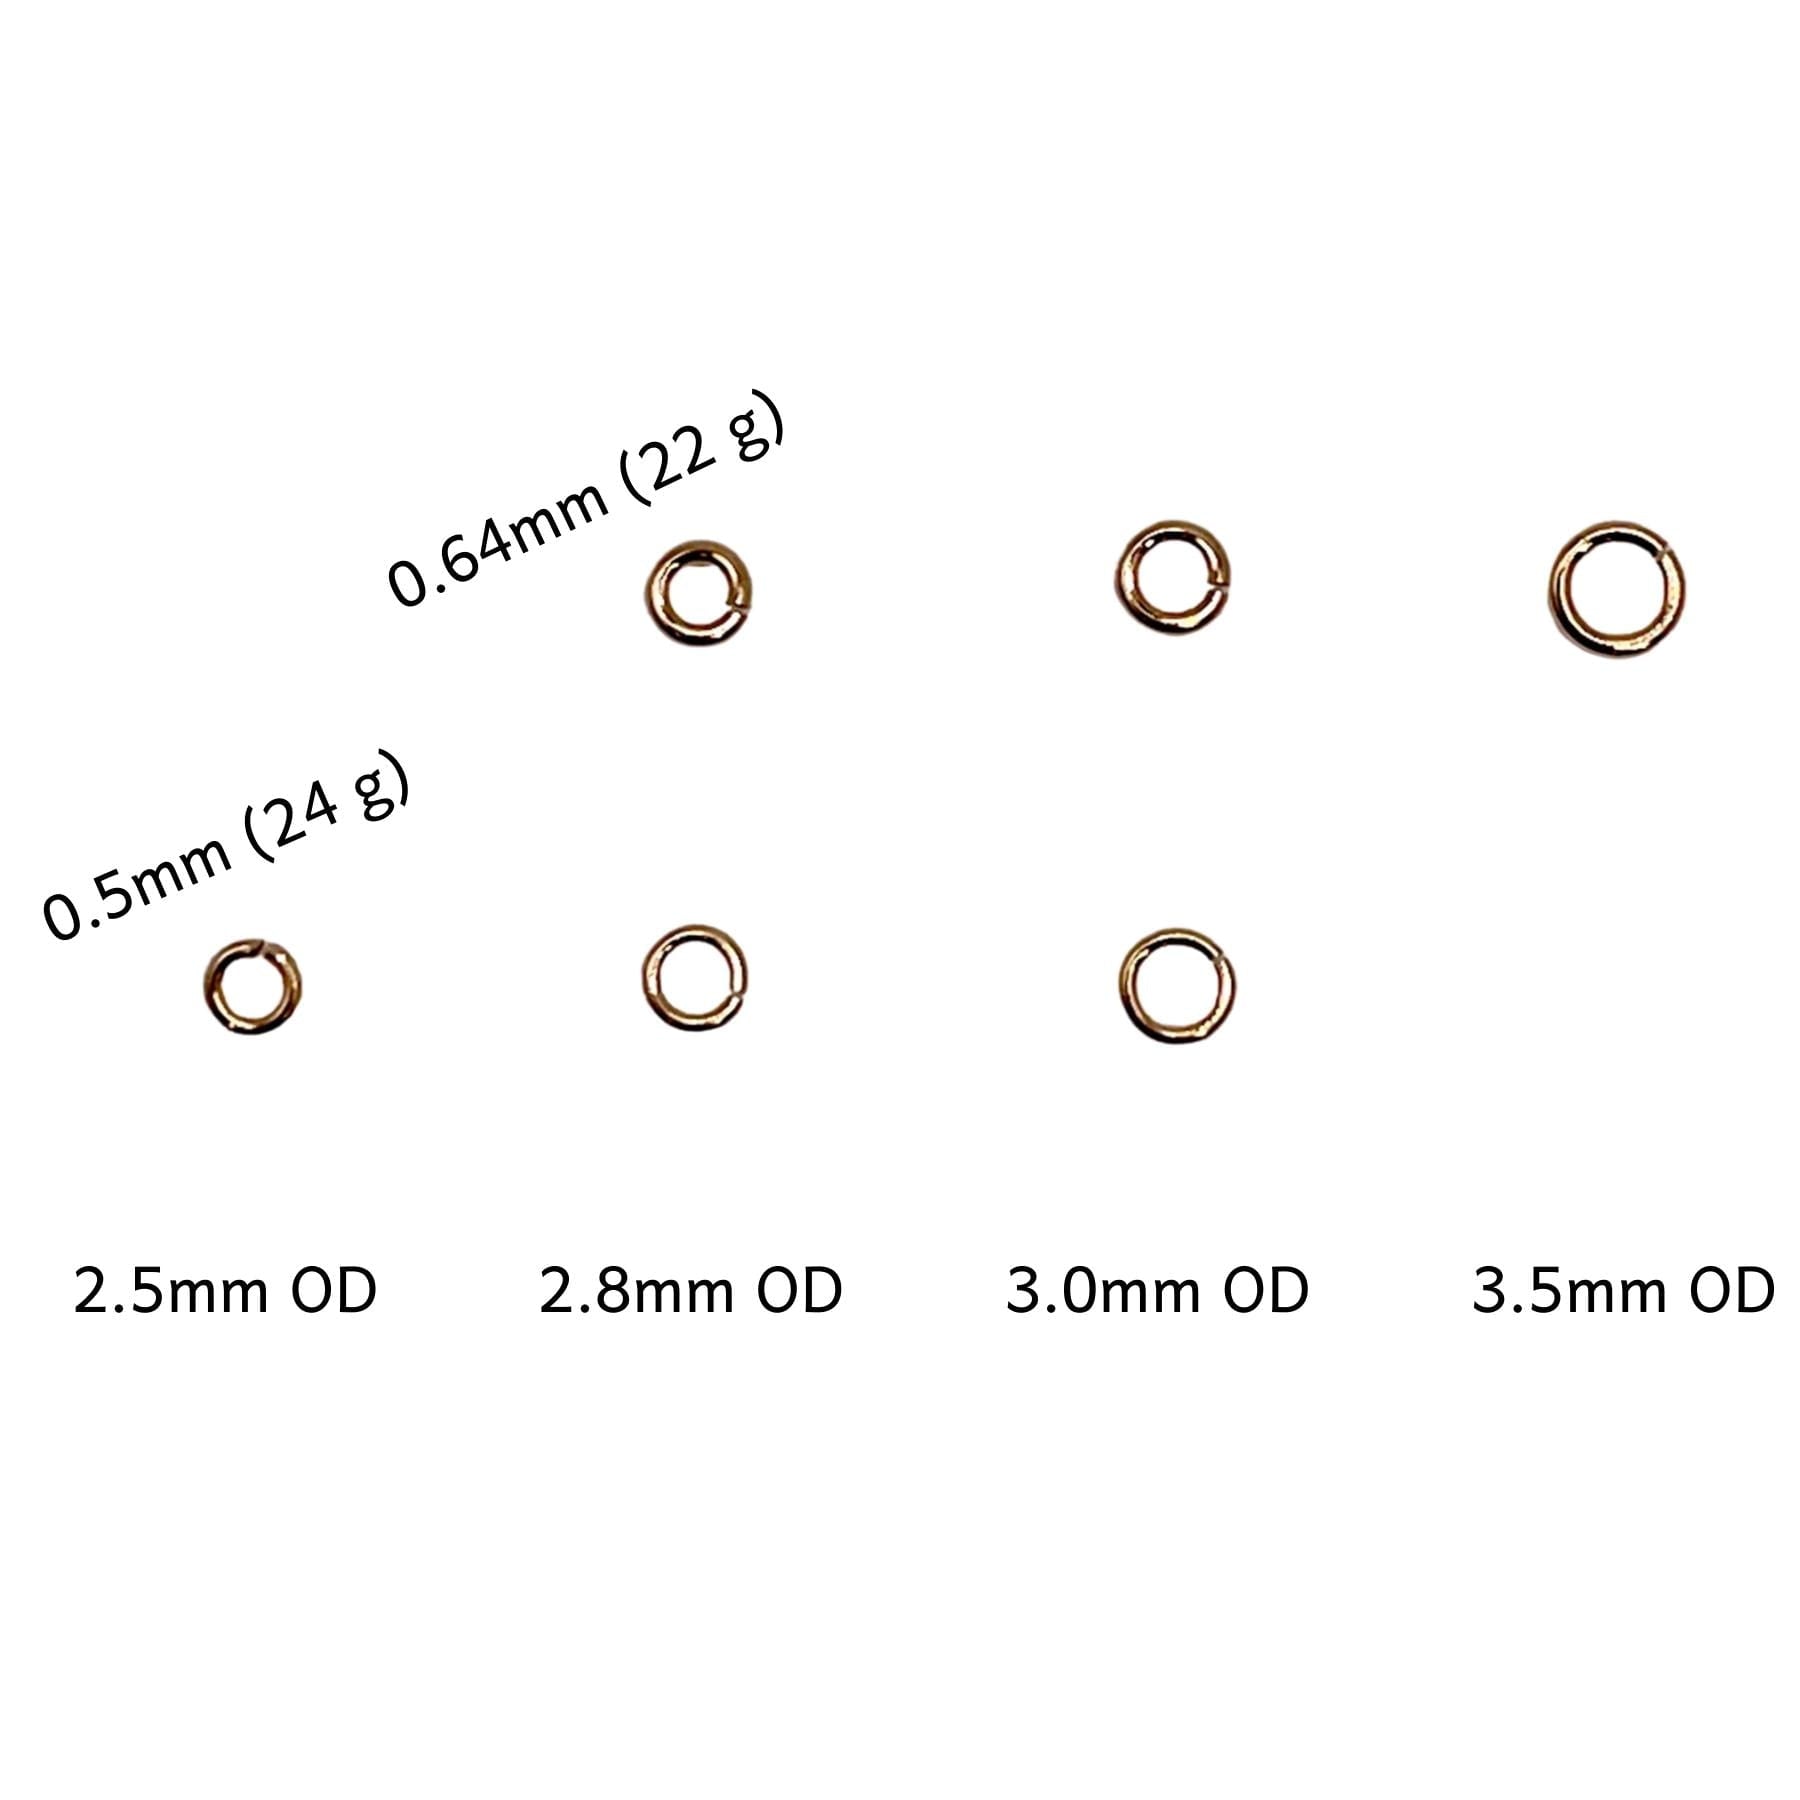 14K Yellow Gold Round Click & Lock Jump Rings-Sold by the Piece